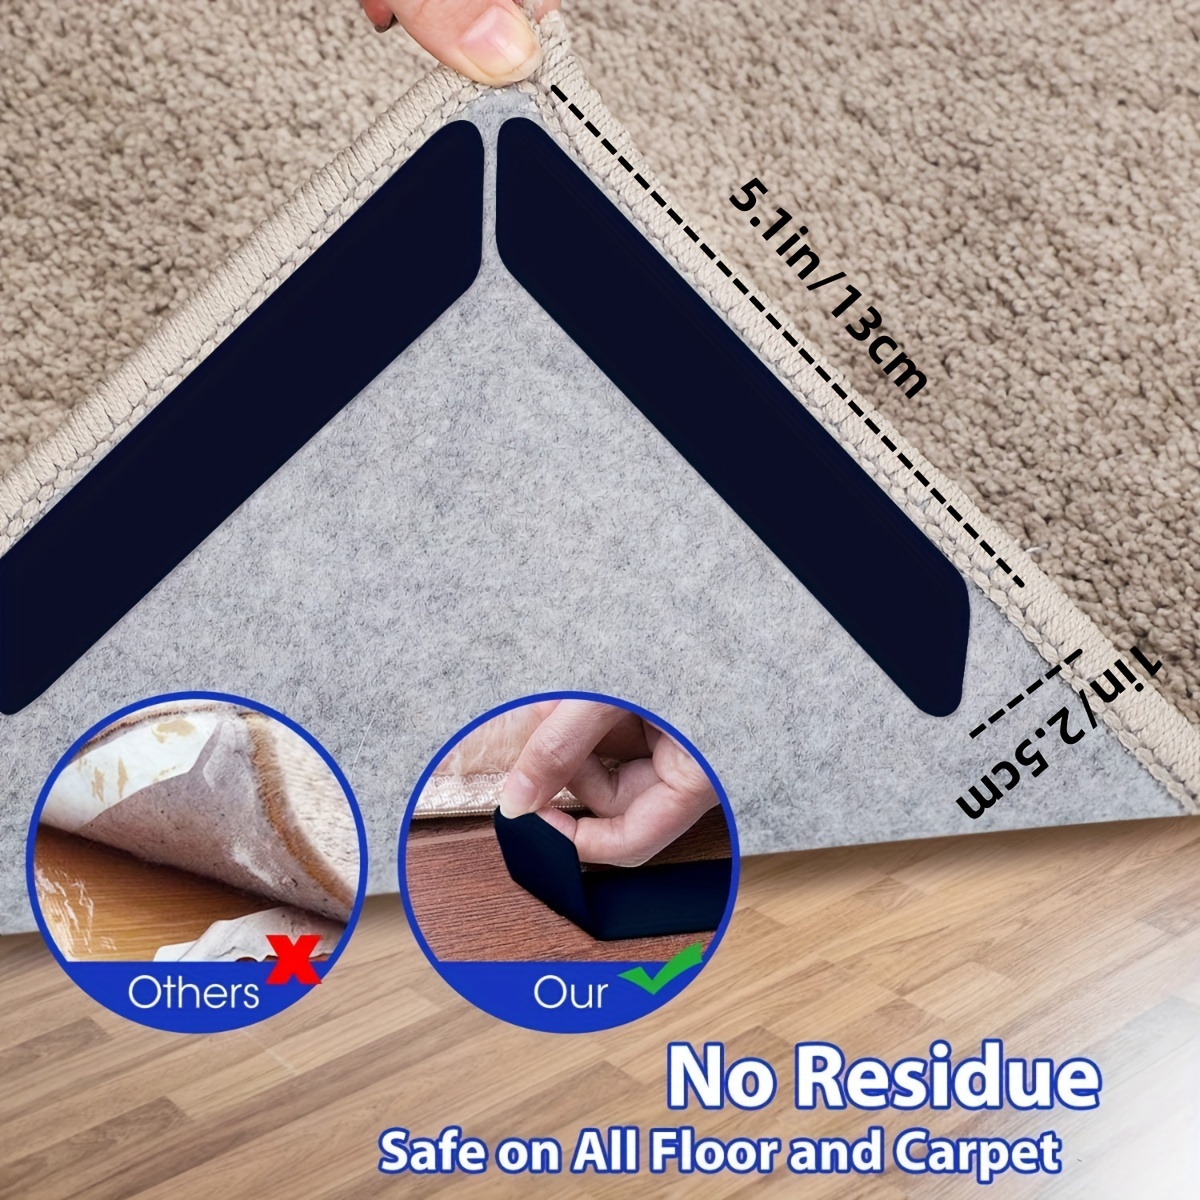 10 Pcs Anti Curling Carpet Tape Rug Grippers, Non Slip Rug Runner Gripper  Pad for Area Rugs Double Sided Washable Reusable Pads for Tile Hardwood